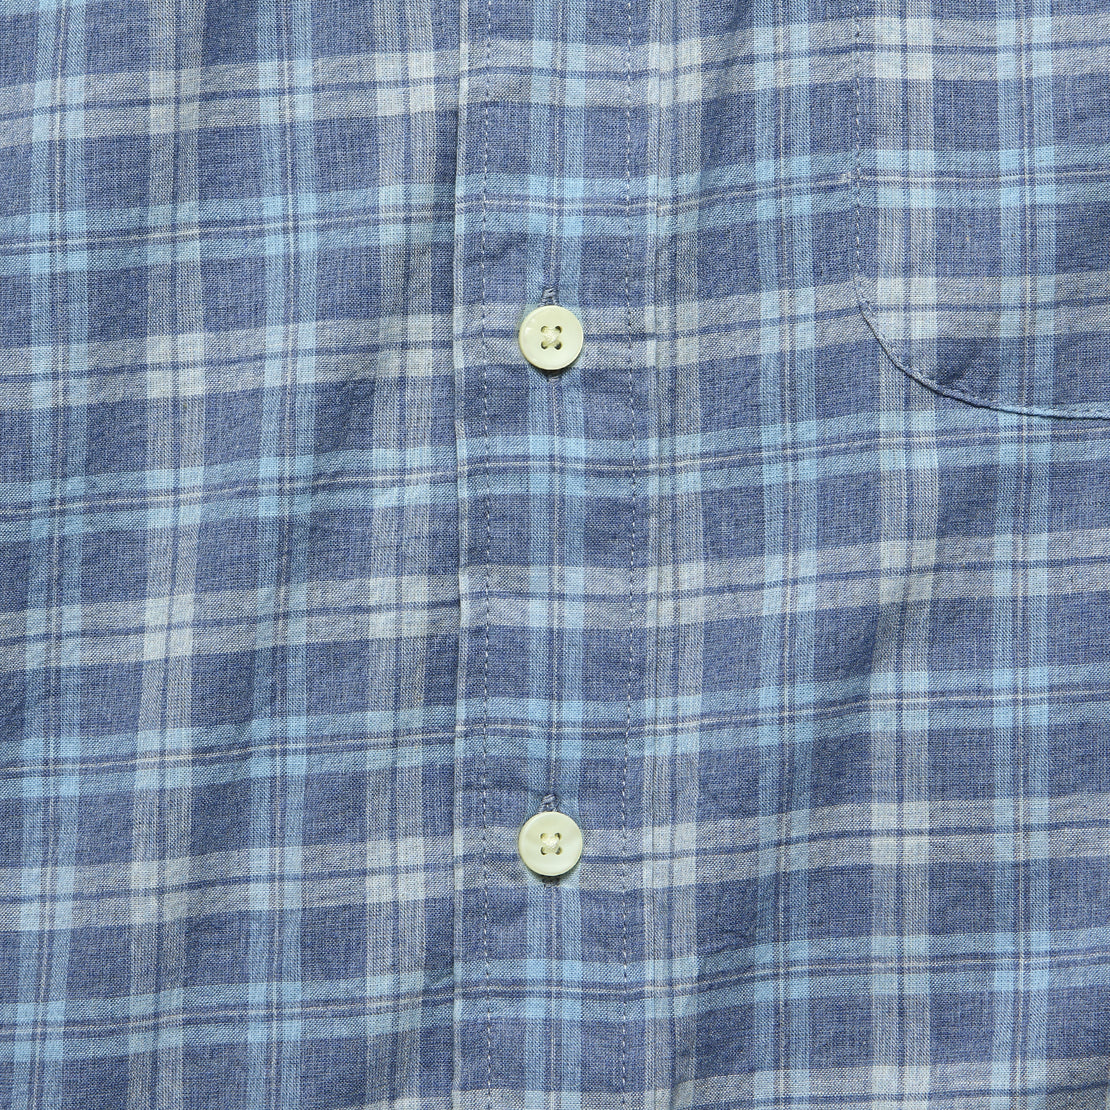 Pacific Shirt - Melange Blue Multi - Faherty - STAG Provisions - Tops - L/S Woven - Plaid